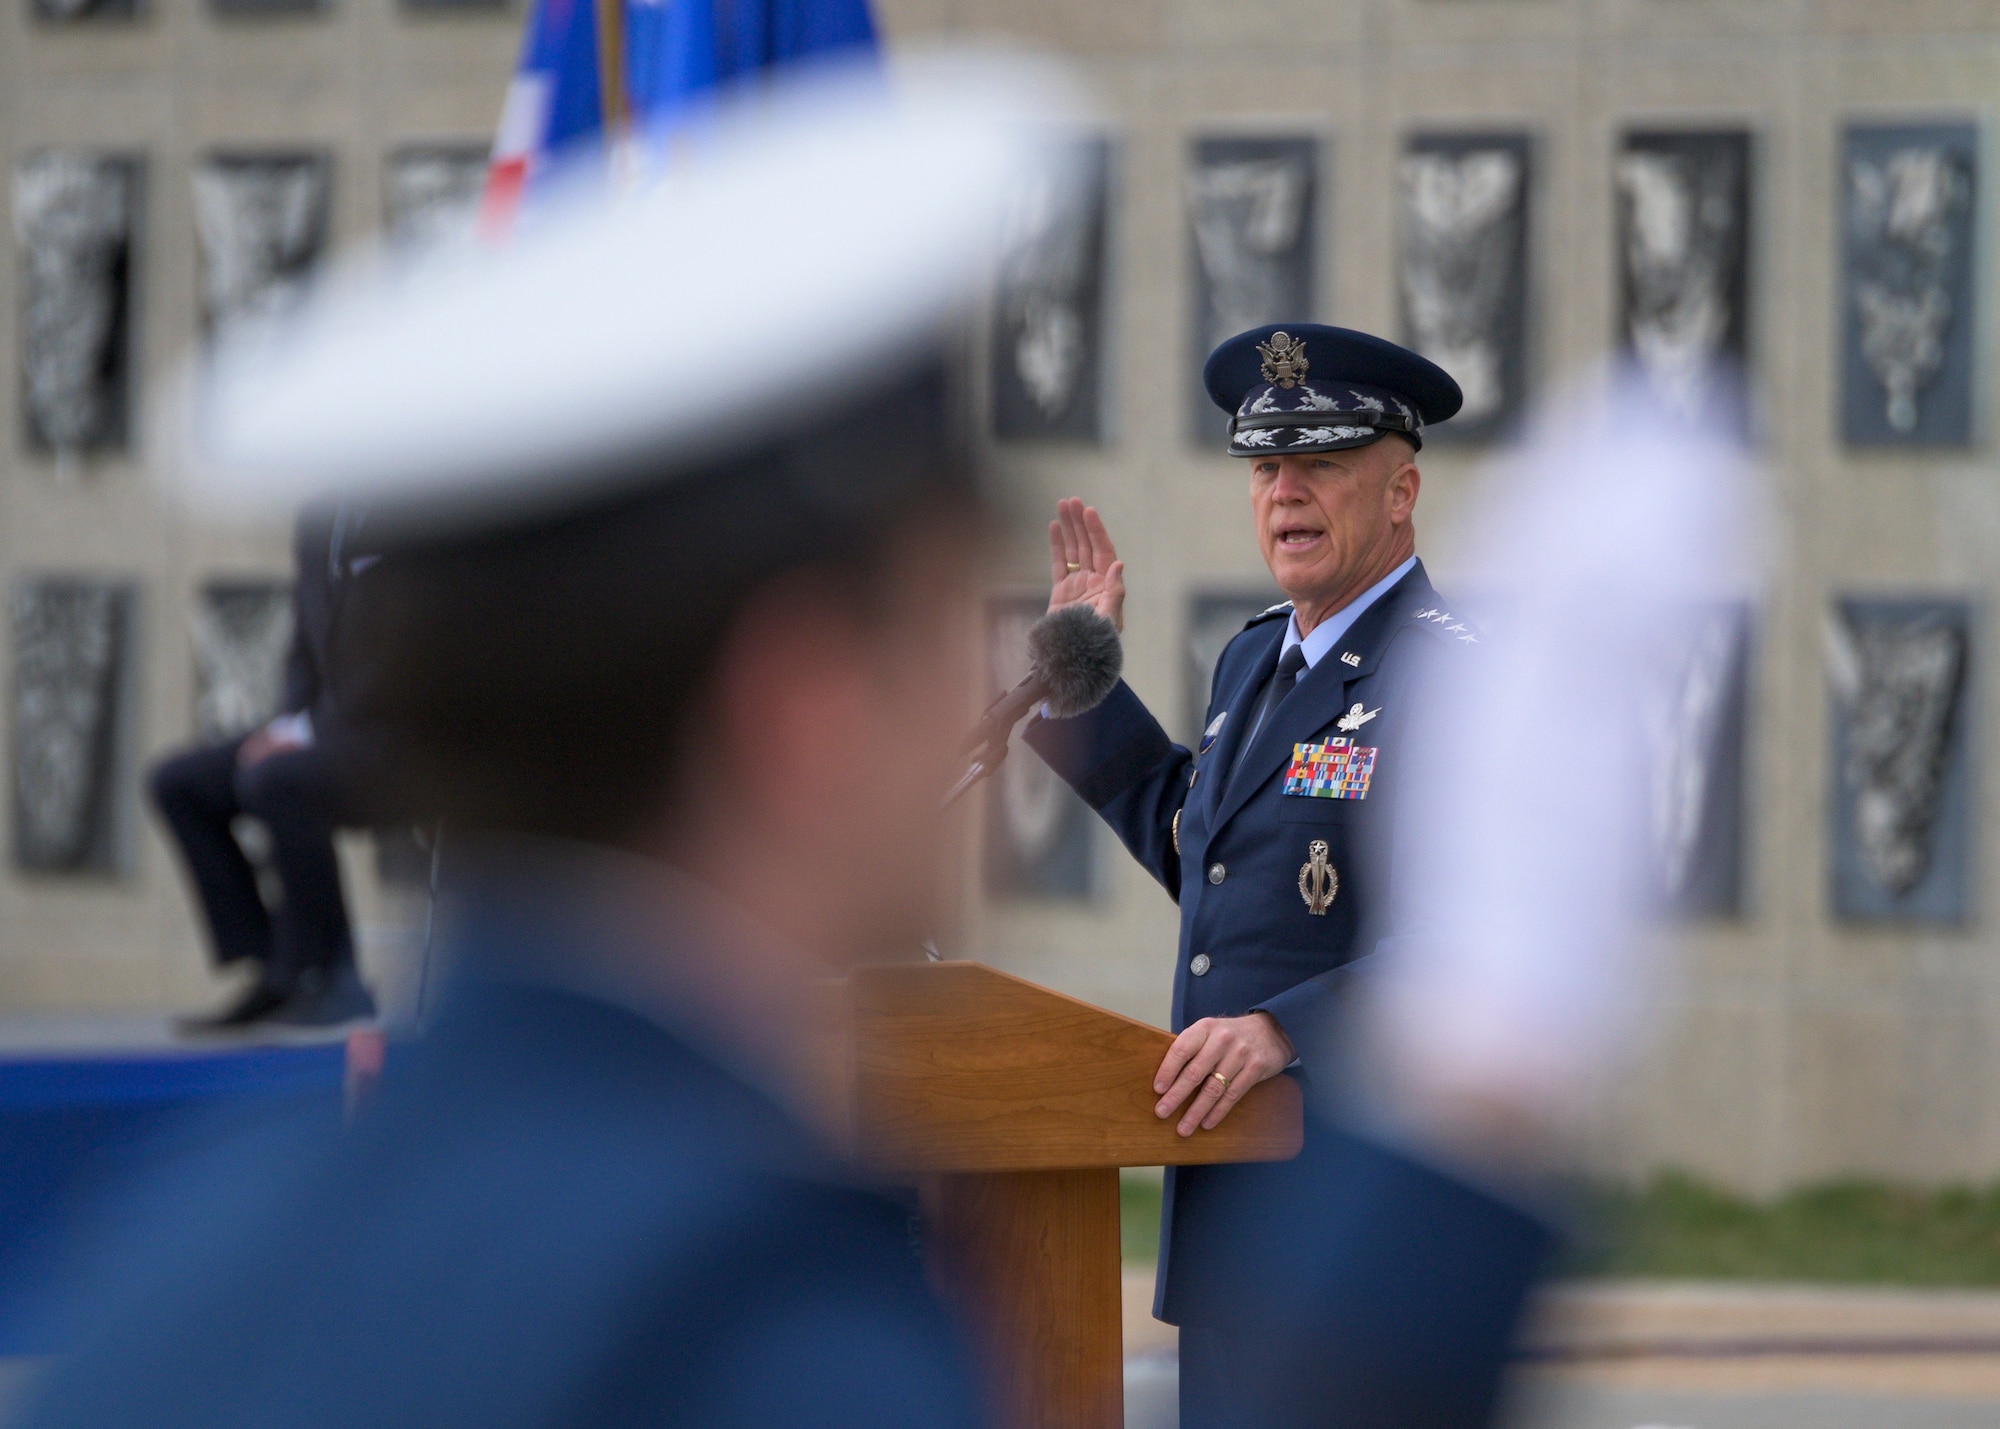 Gen. John W. “Jay” Raymond, Chief of Space Operations, administers the U.S. Space Force Oath of Office to the Eighty-Six Space Force Cadets during the U.S. Air Force Academy Class of 2020 graduation at the Air Force Academy in Colorado Springs, Colo.